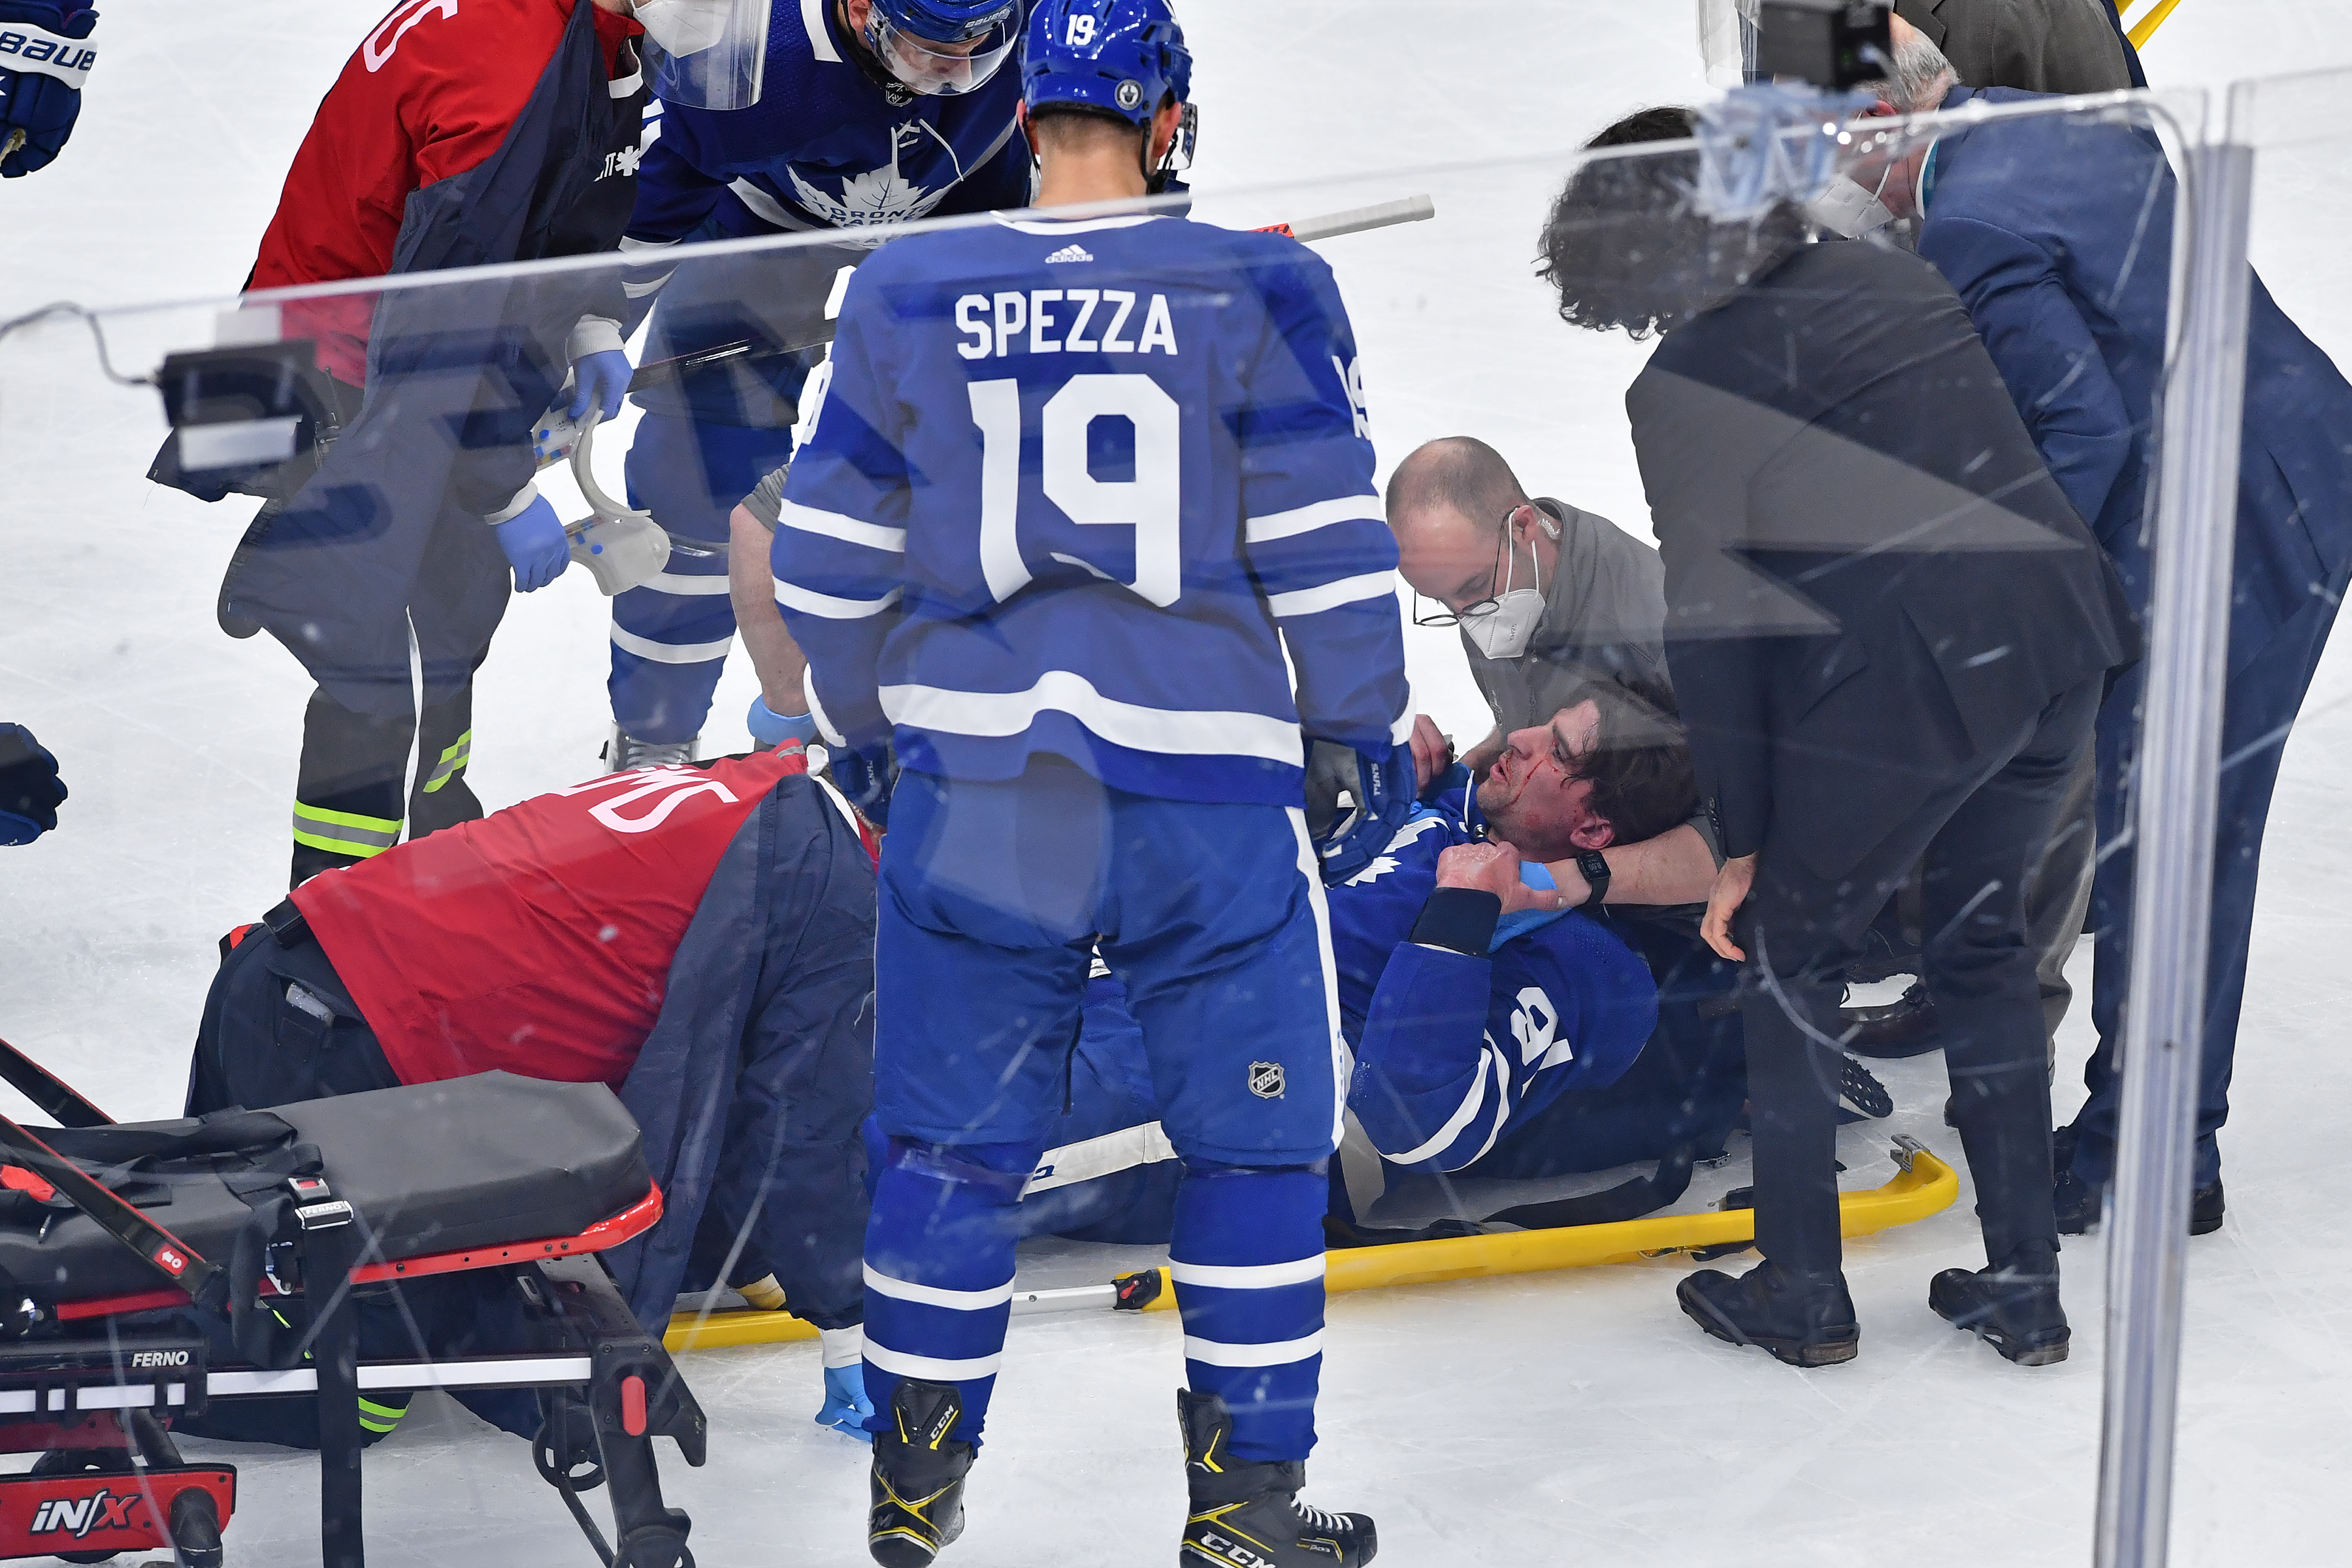 NHL: Toronto Maple Leafs captain John Tavares stretchered off ice after  scary collision, Corey Perry, Ben Chiarot